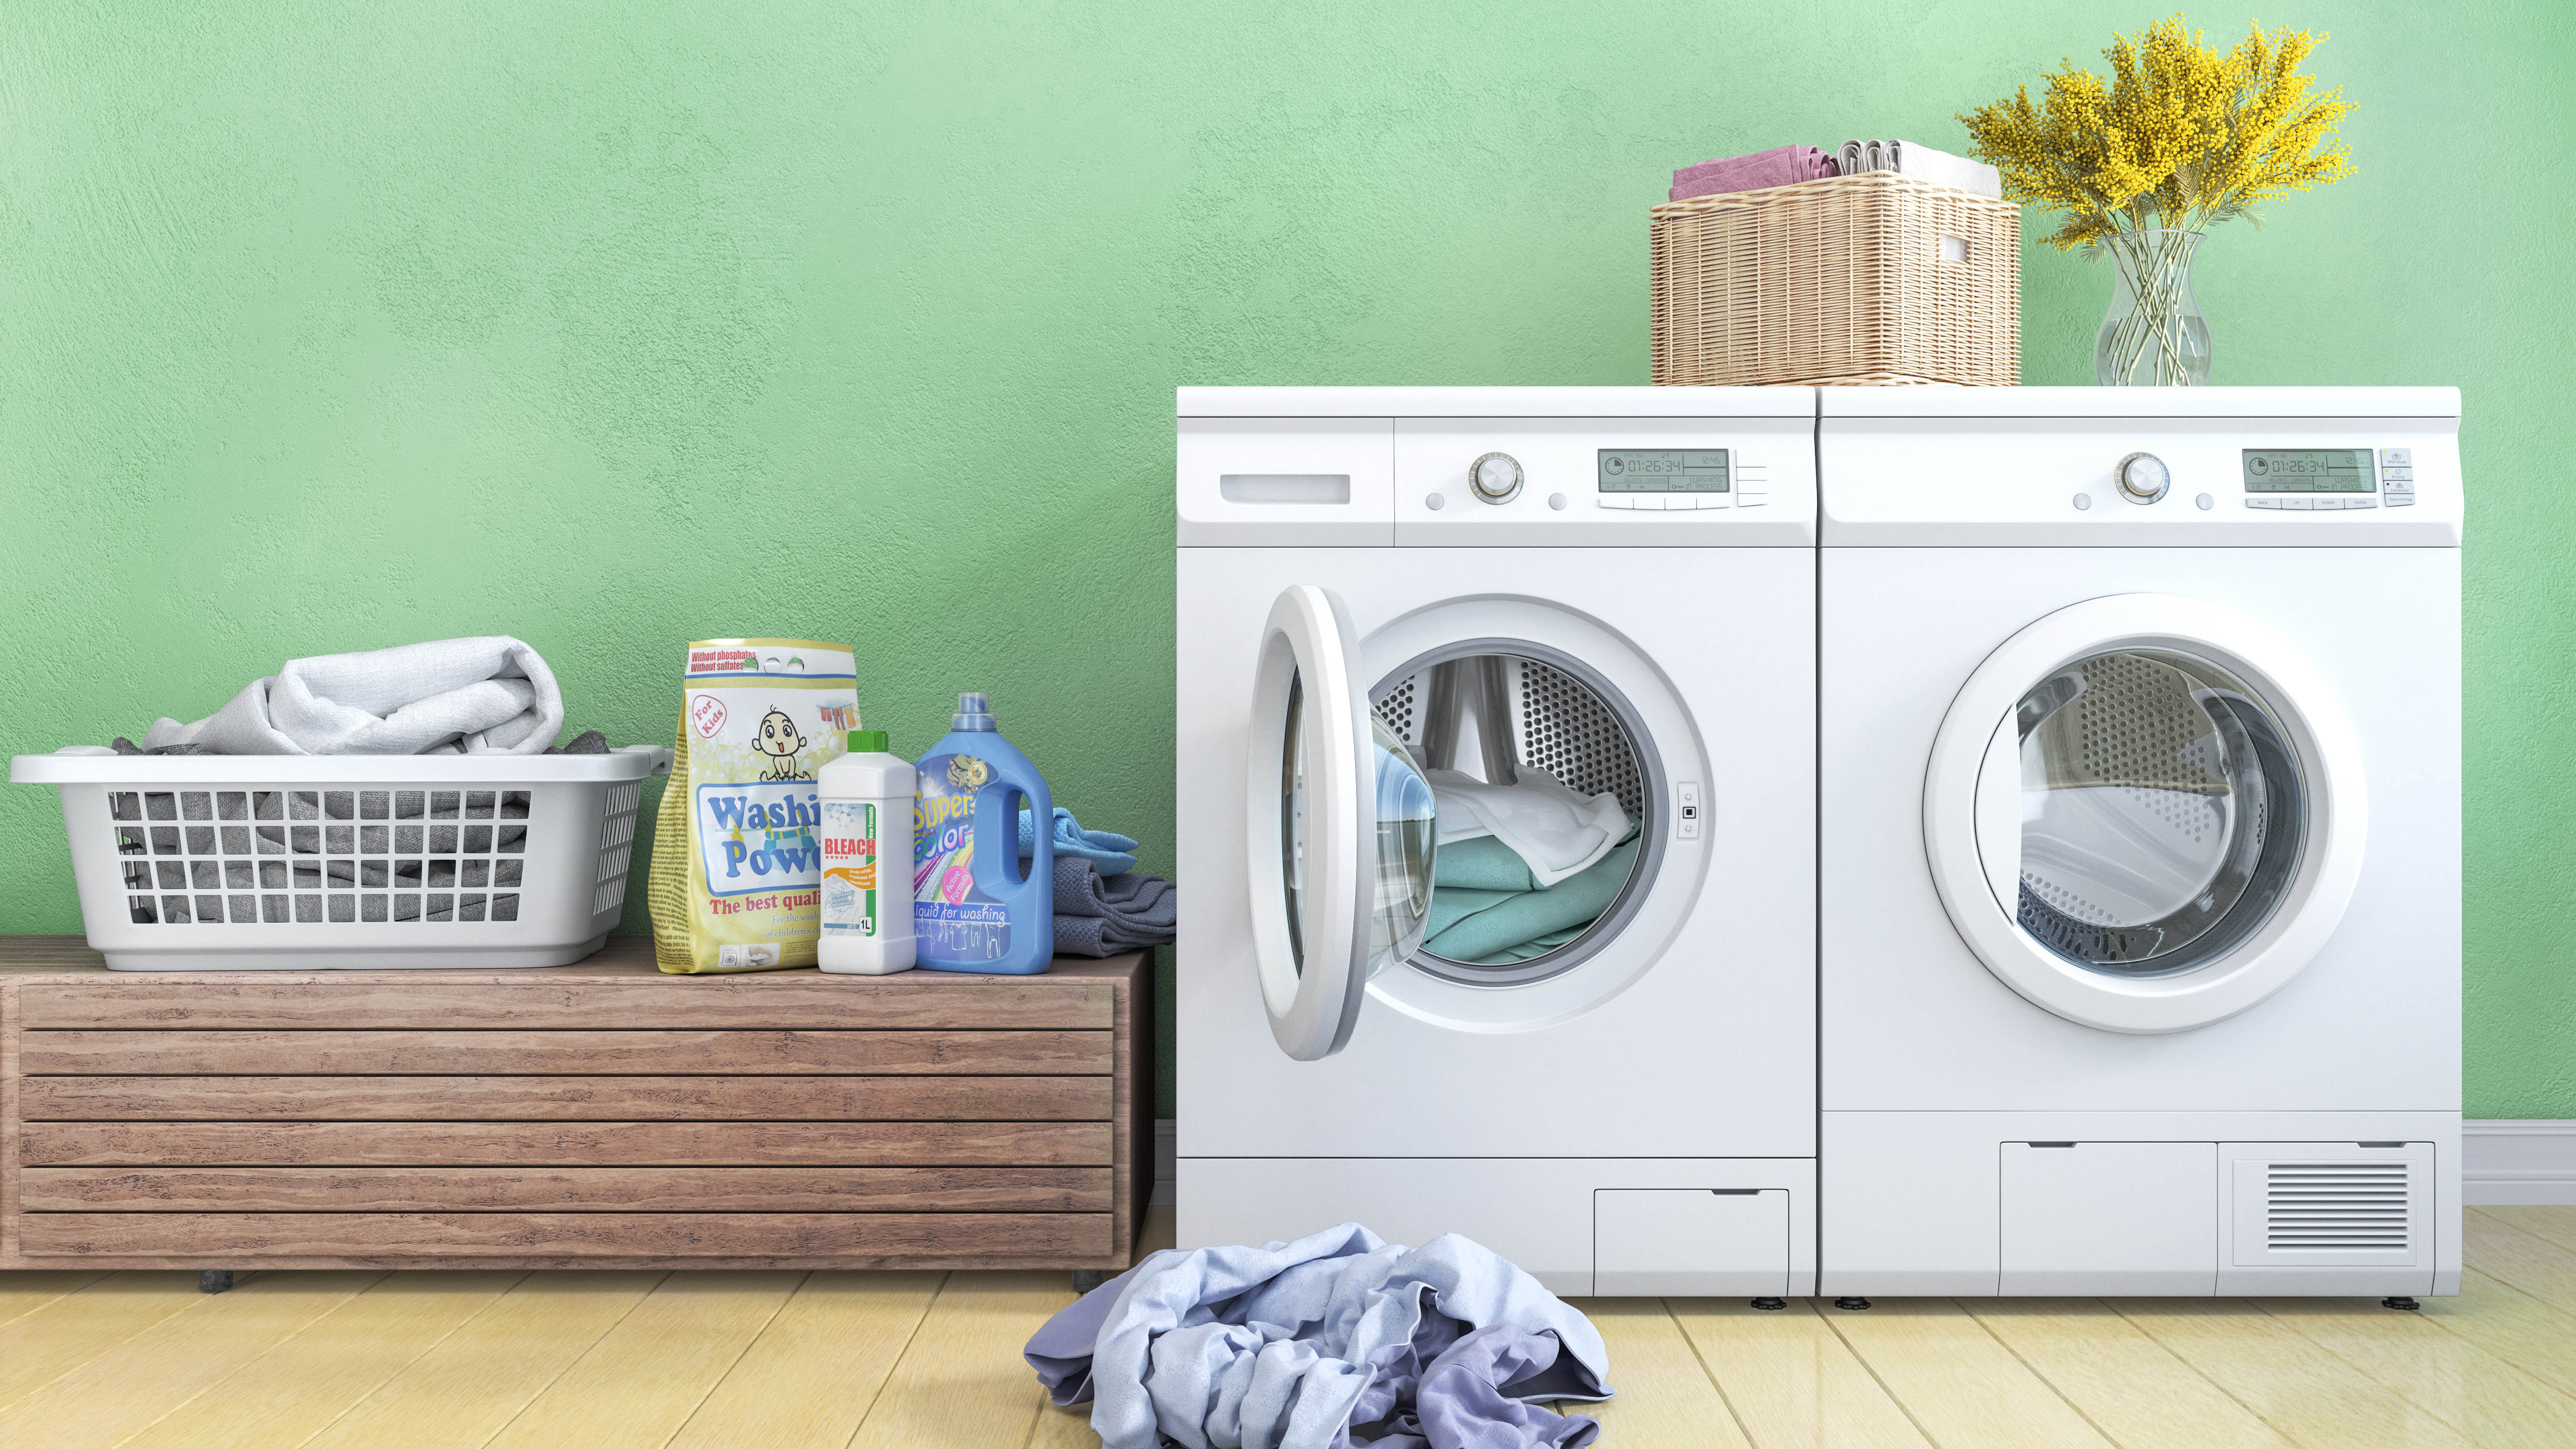 Adjacent washer and dryer, laundry and detergent